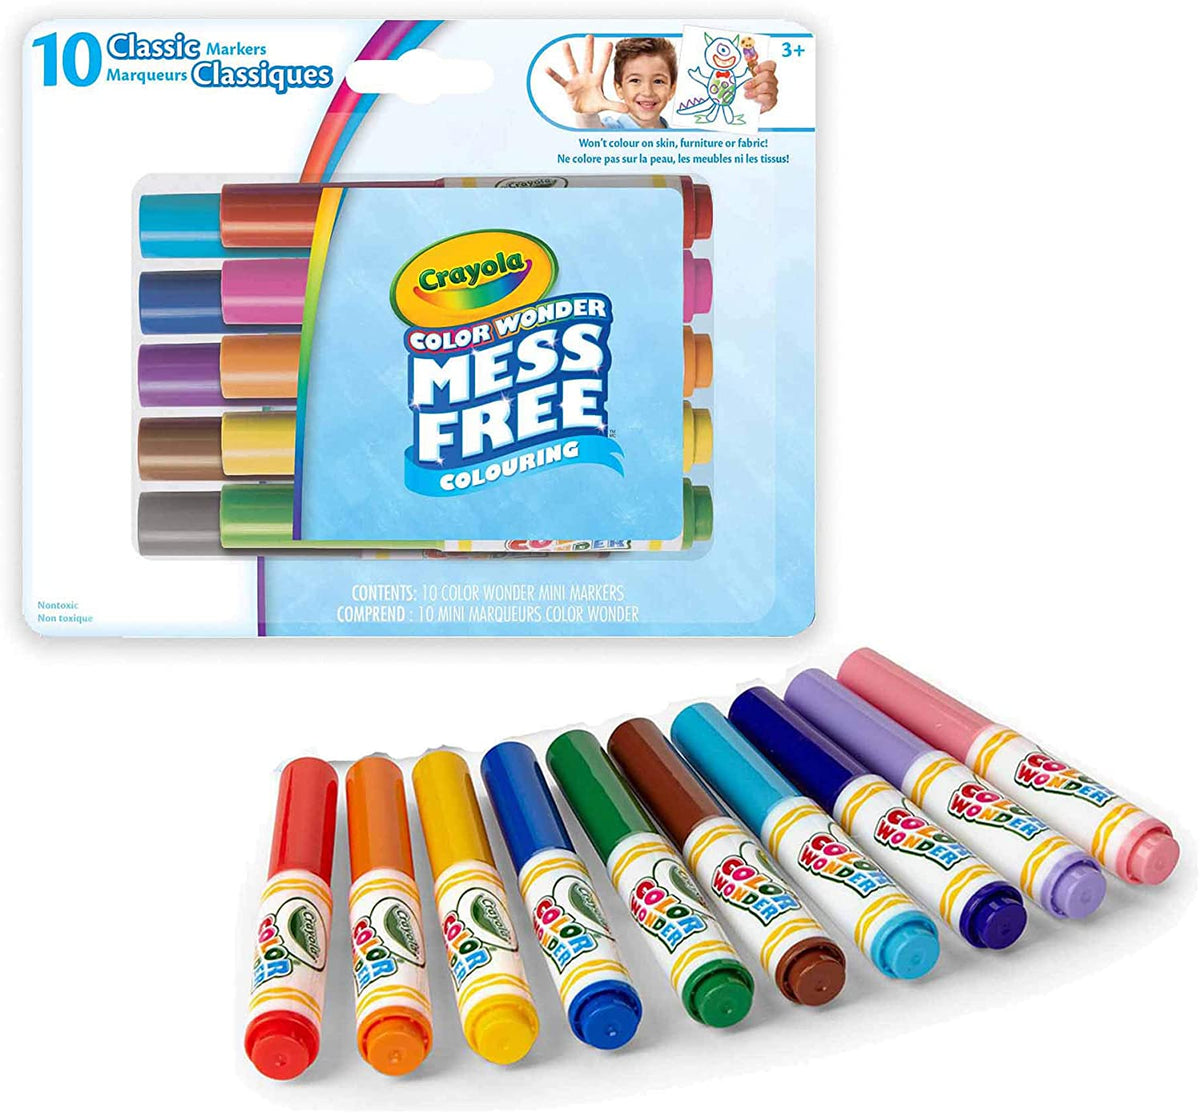 Crayola Color Wonder Markers Mess Free Coloring Classic Pastel Colors 20 Count 2 Pack